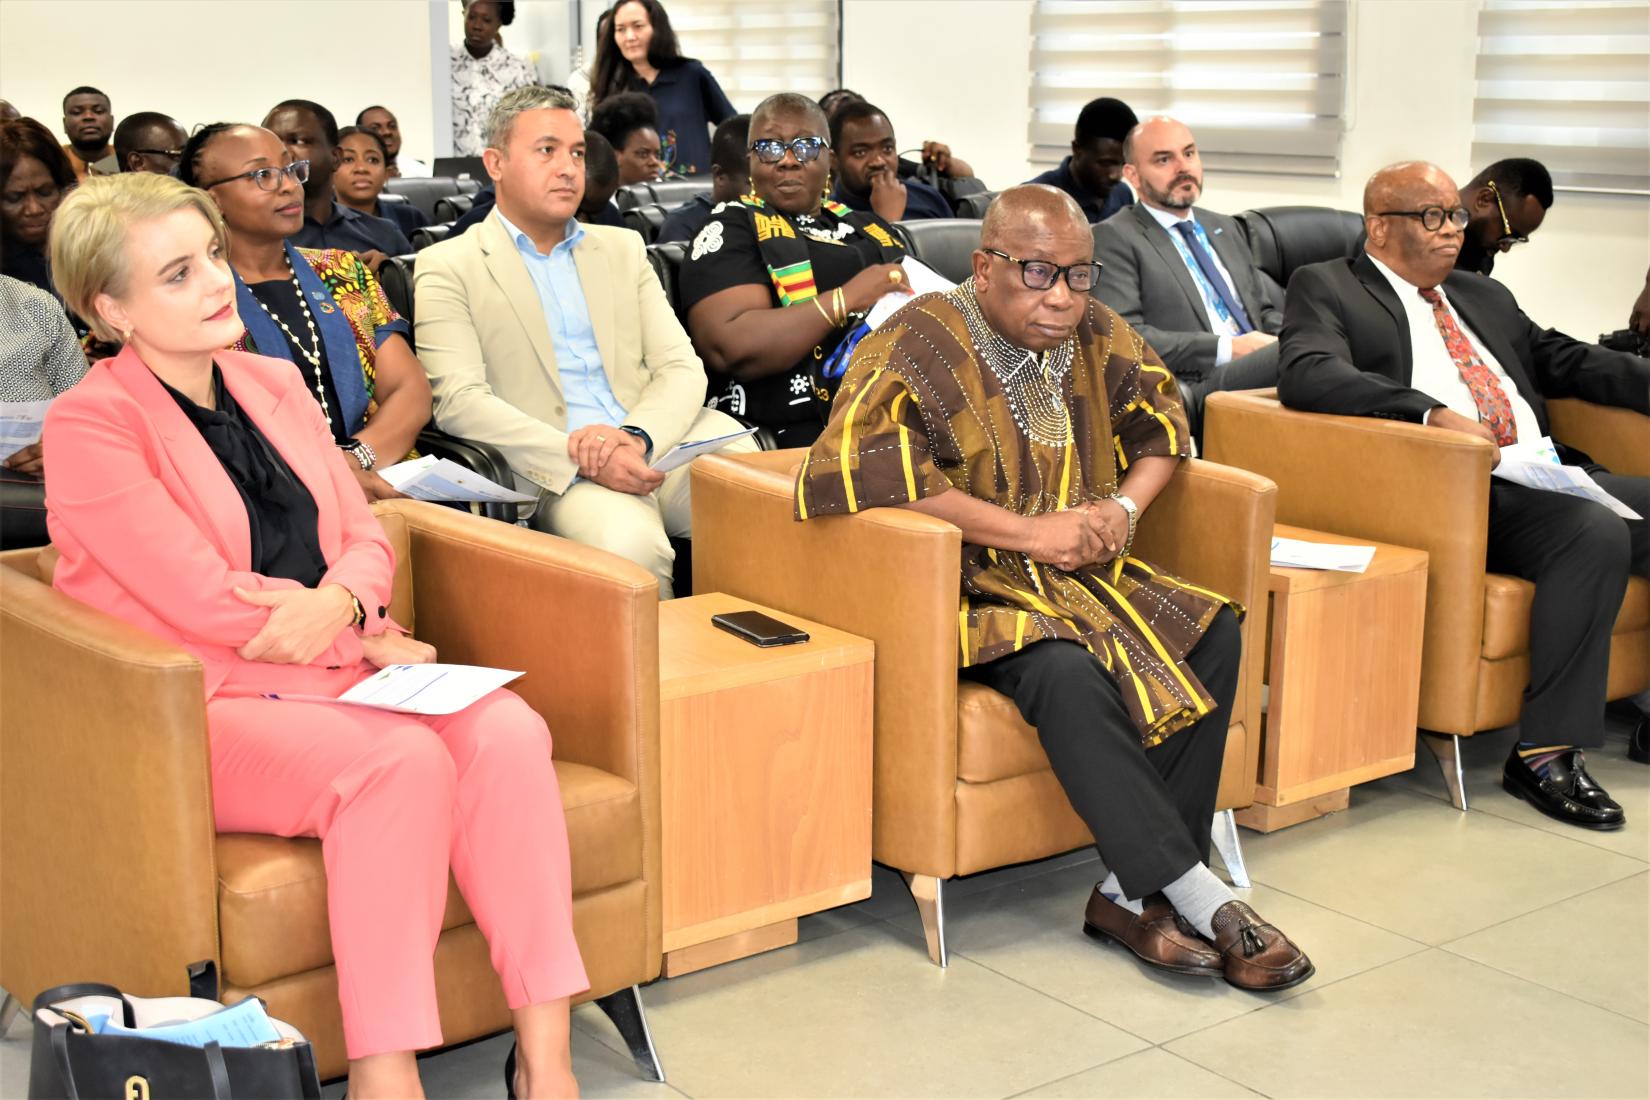 Front row from left to right. Simone Giger, Switzerland Ambassador to Ghana, the Minister of Health, Hon Kwaku Agyeman-Manu and Professor Fred Binka, VC, The University of Health and Allied Sciences present at the launch.